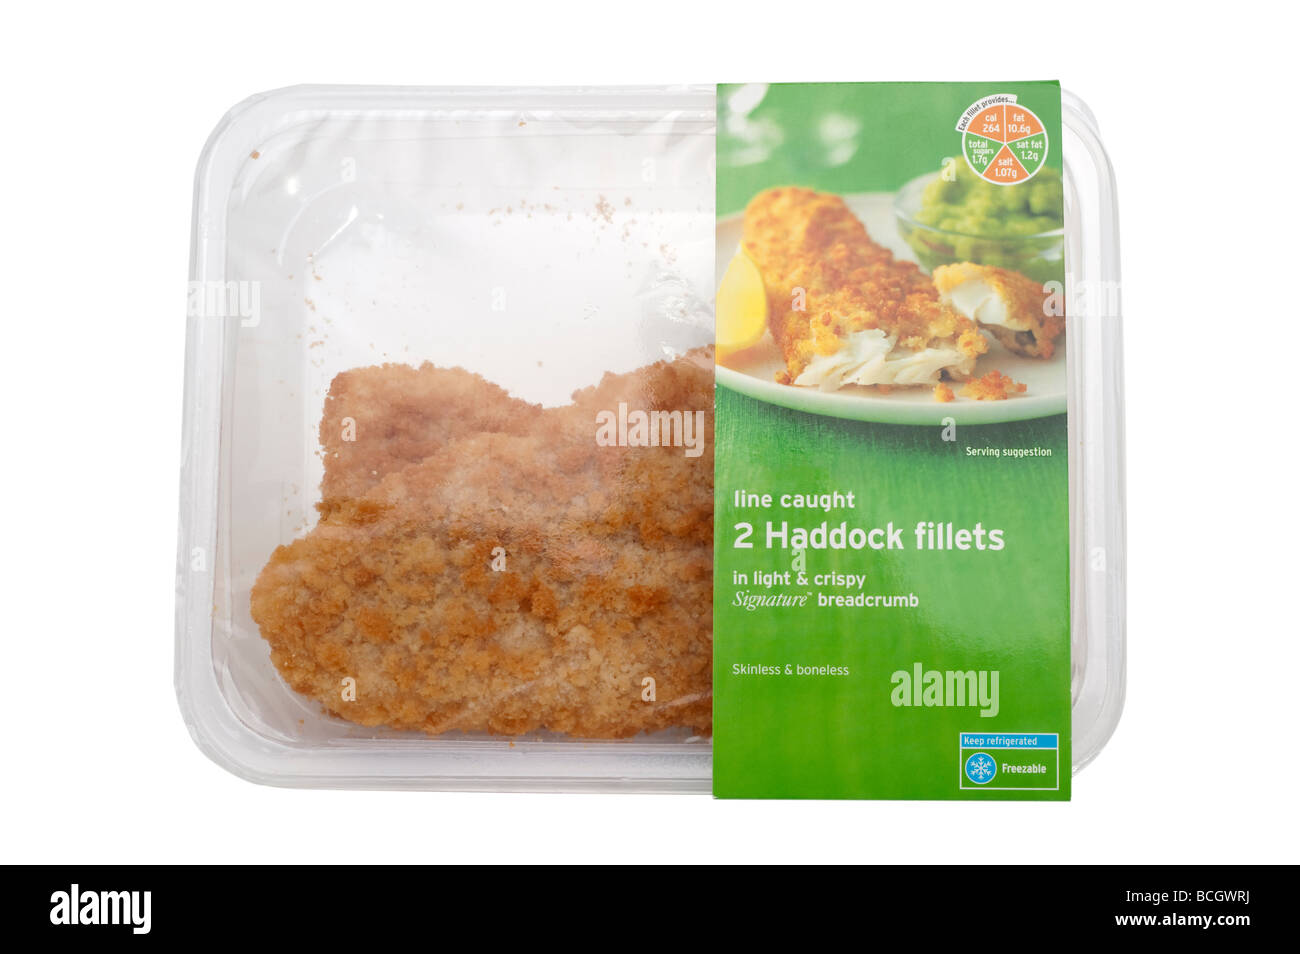 Two 'line caught' 'haddock fillets' in breadcrumb coating sealed in a clear plastic carton package Stock Photo